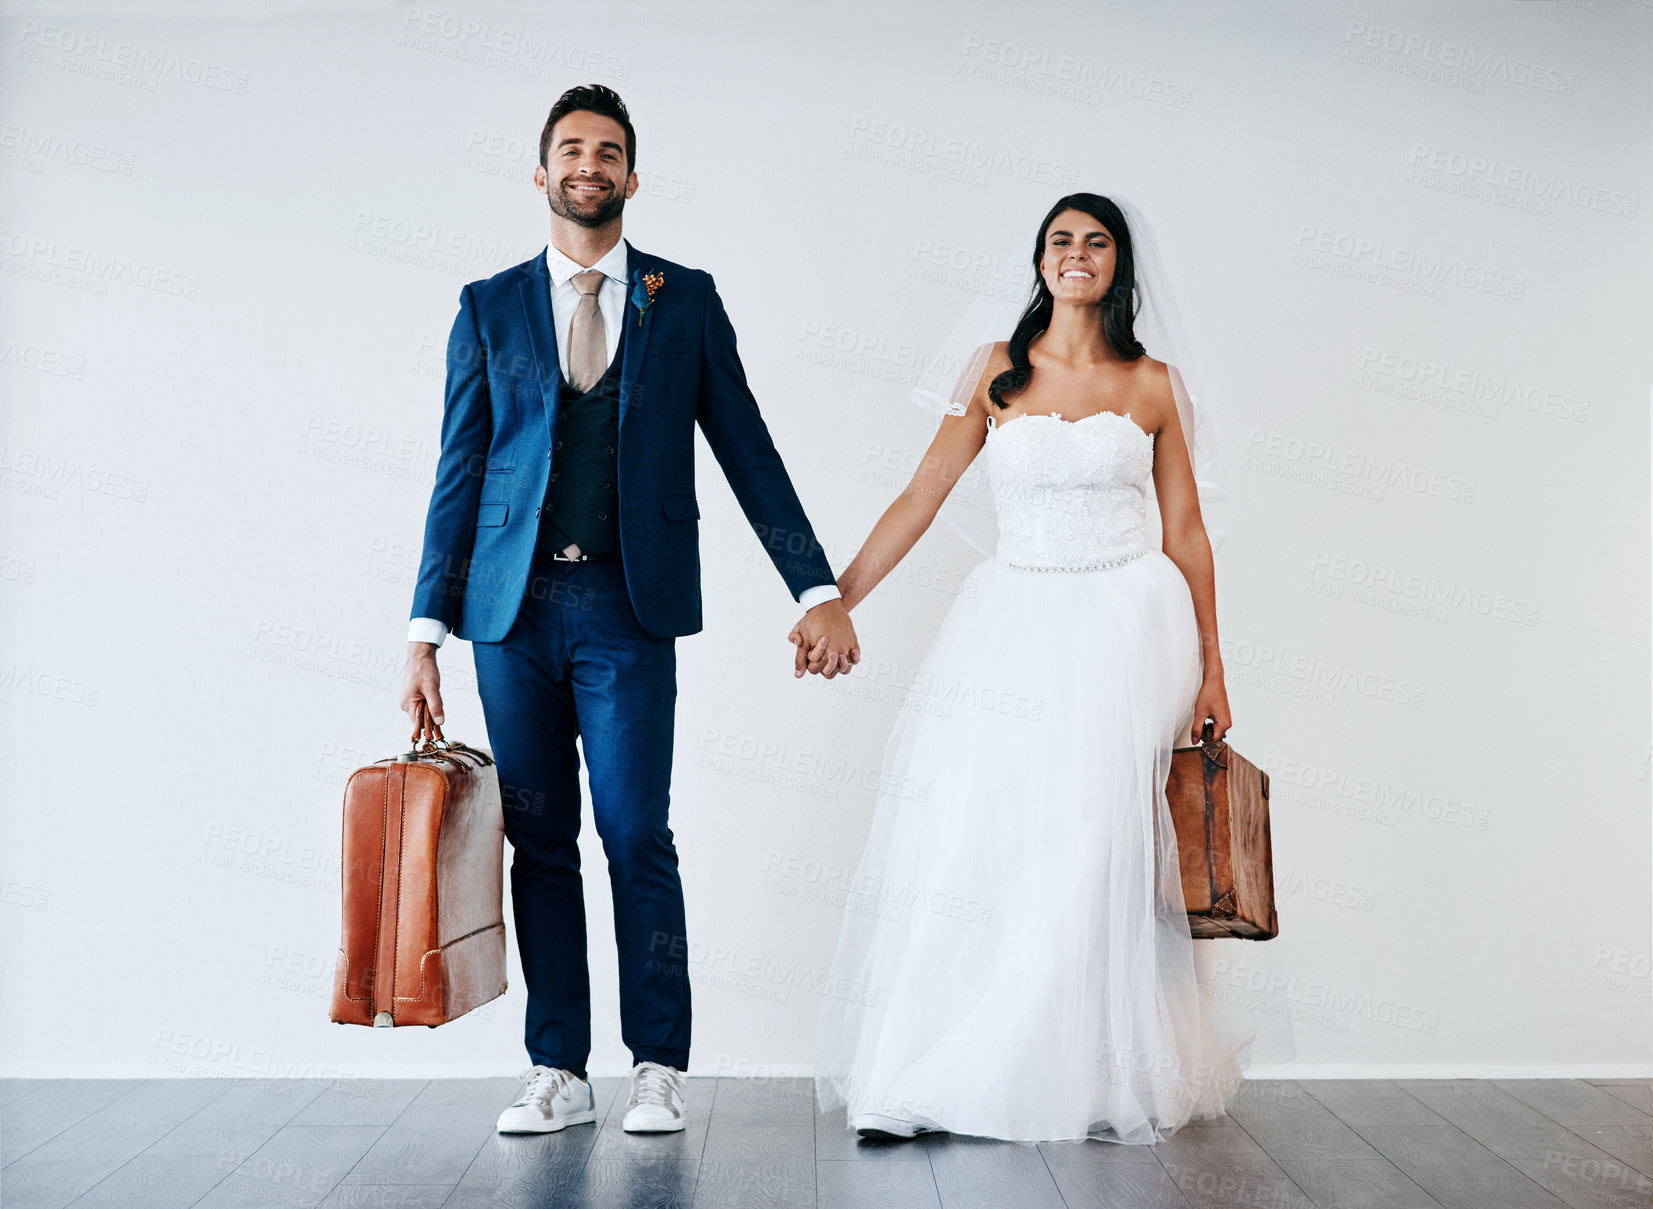 Buy stock photo Studio shot of a newly married couple holding hand and carrying bags while standing against a gray background